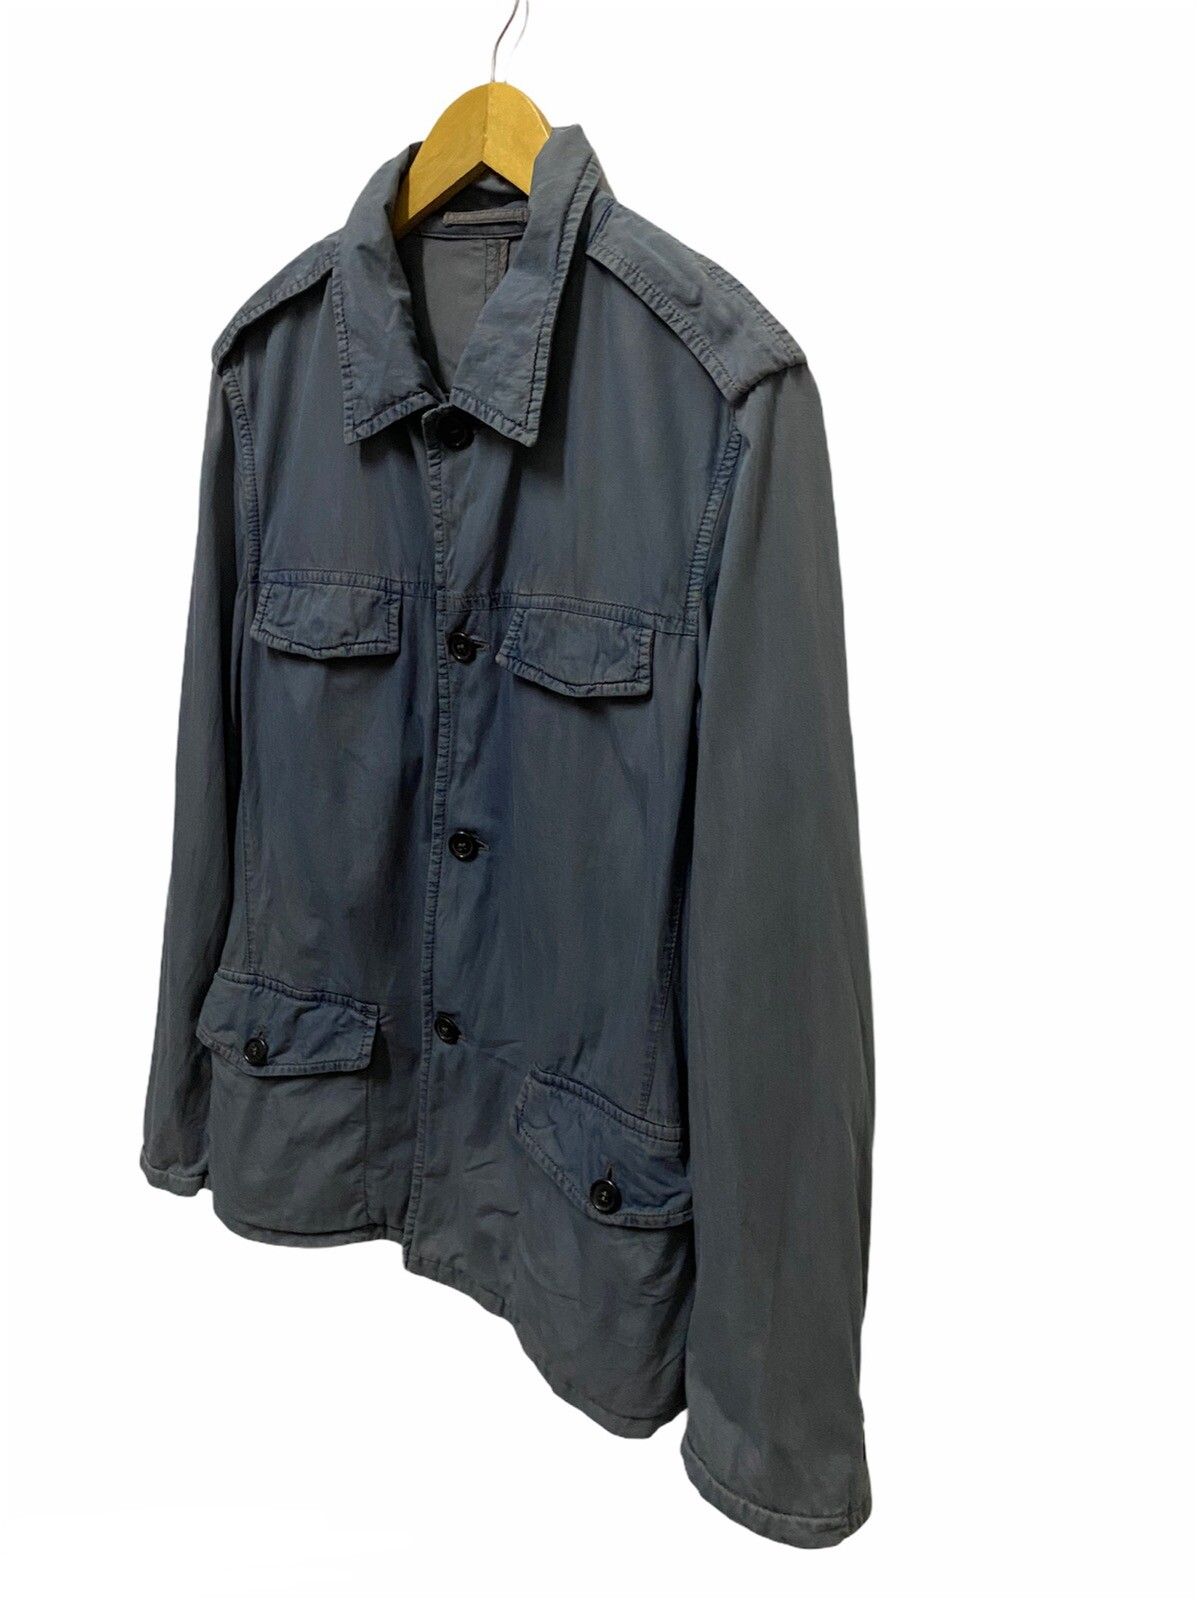 PRADA Button Up Multipocket Light Jacket Made in Italy - 5